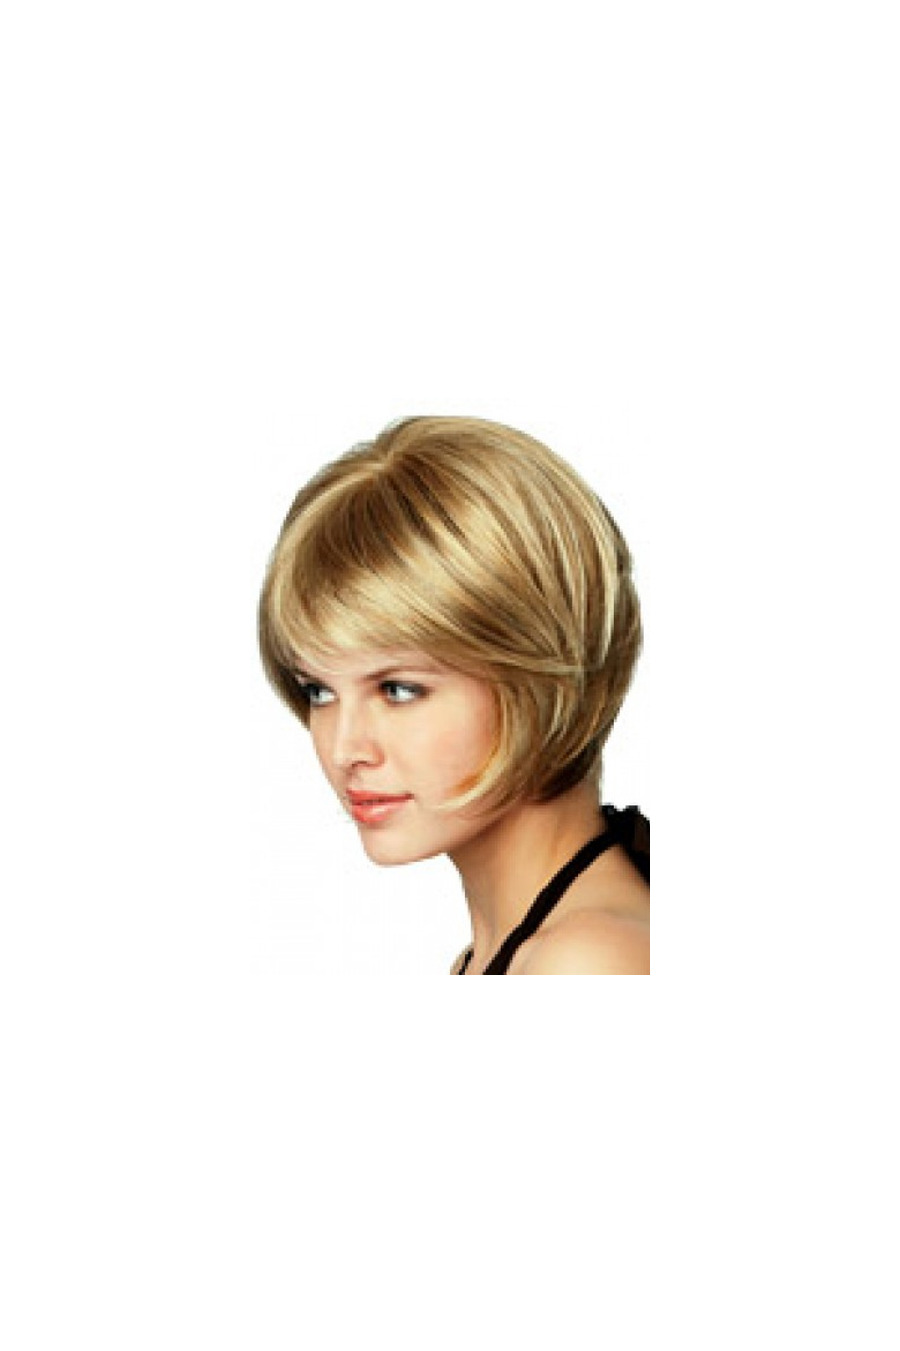 Short Model Synthetic Wig